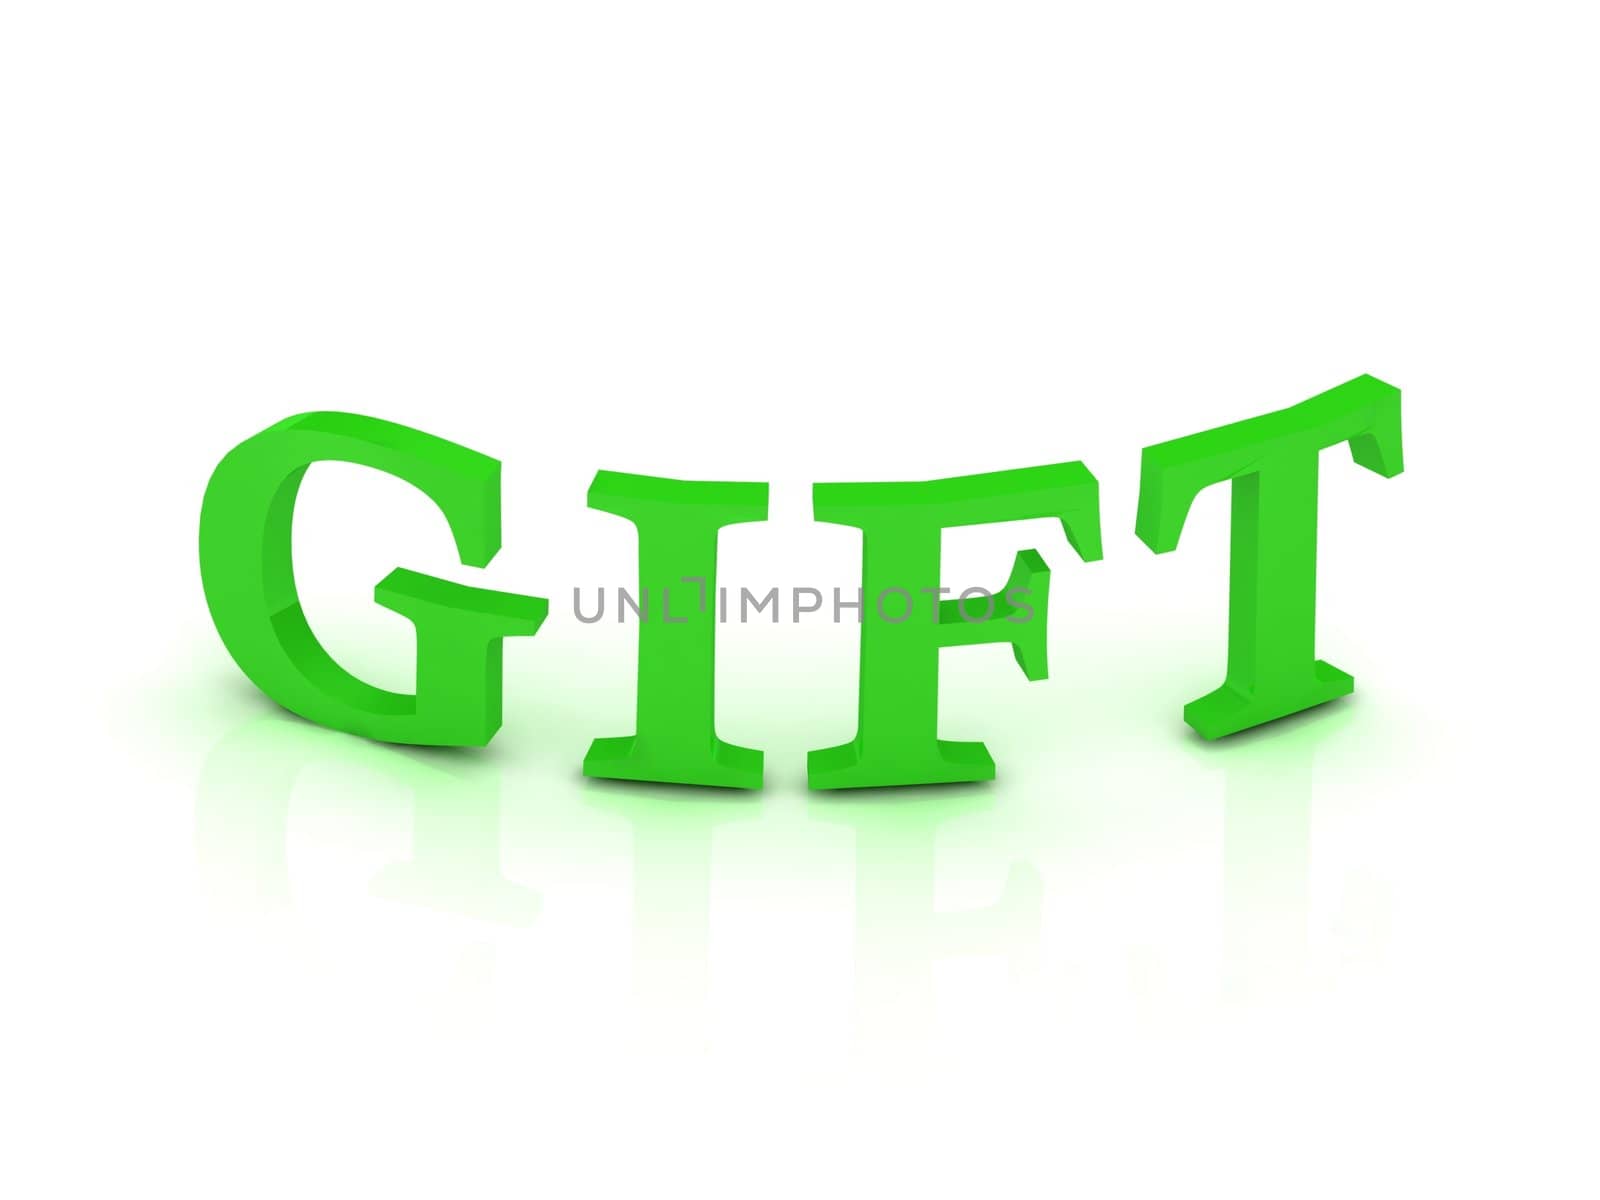 GIFT sign with green letters on isolated white background